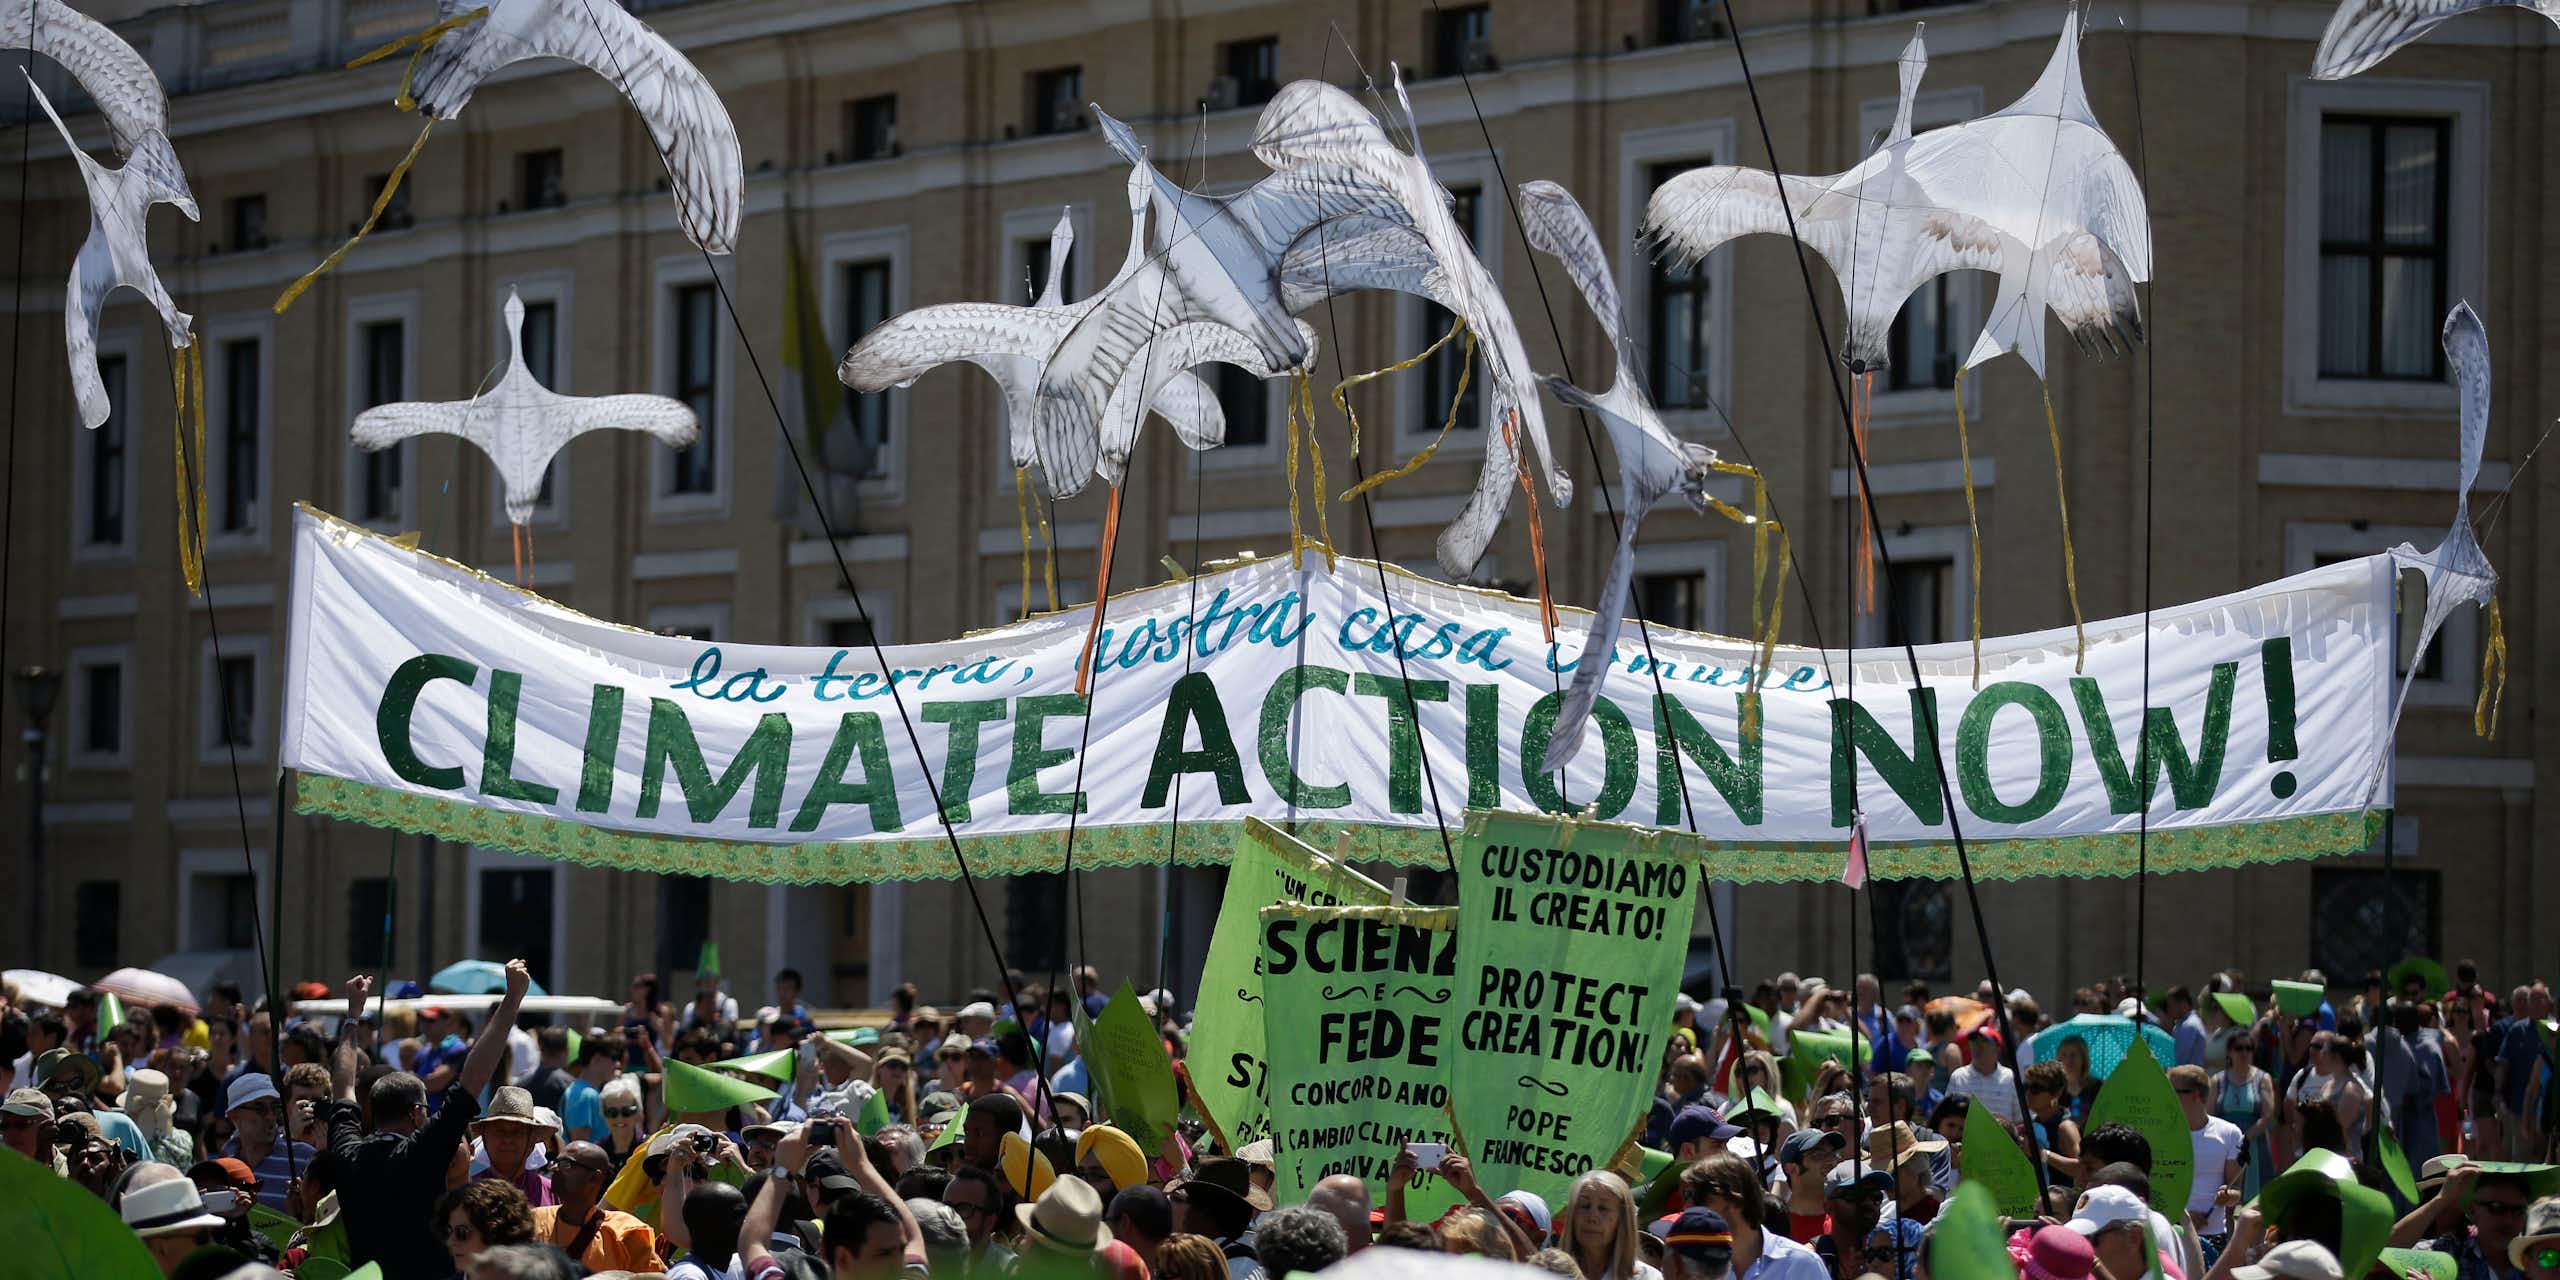 People outside an ornate building hold a sign that says 'Climate action now!'